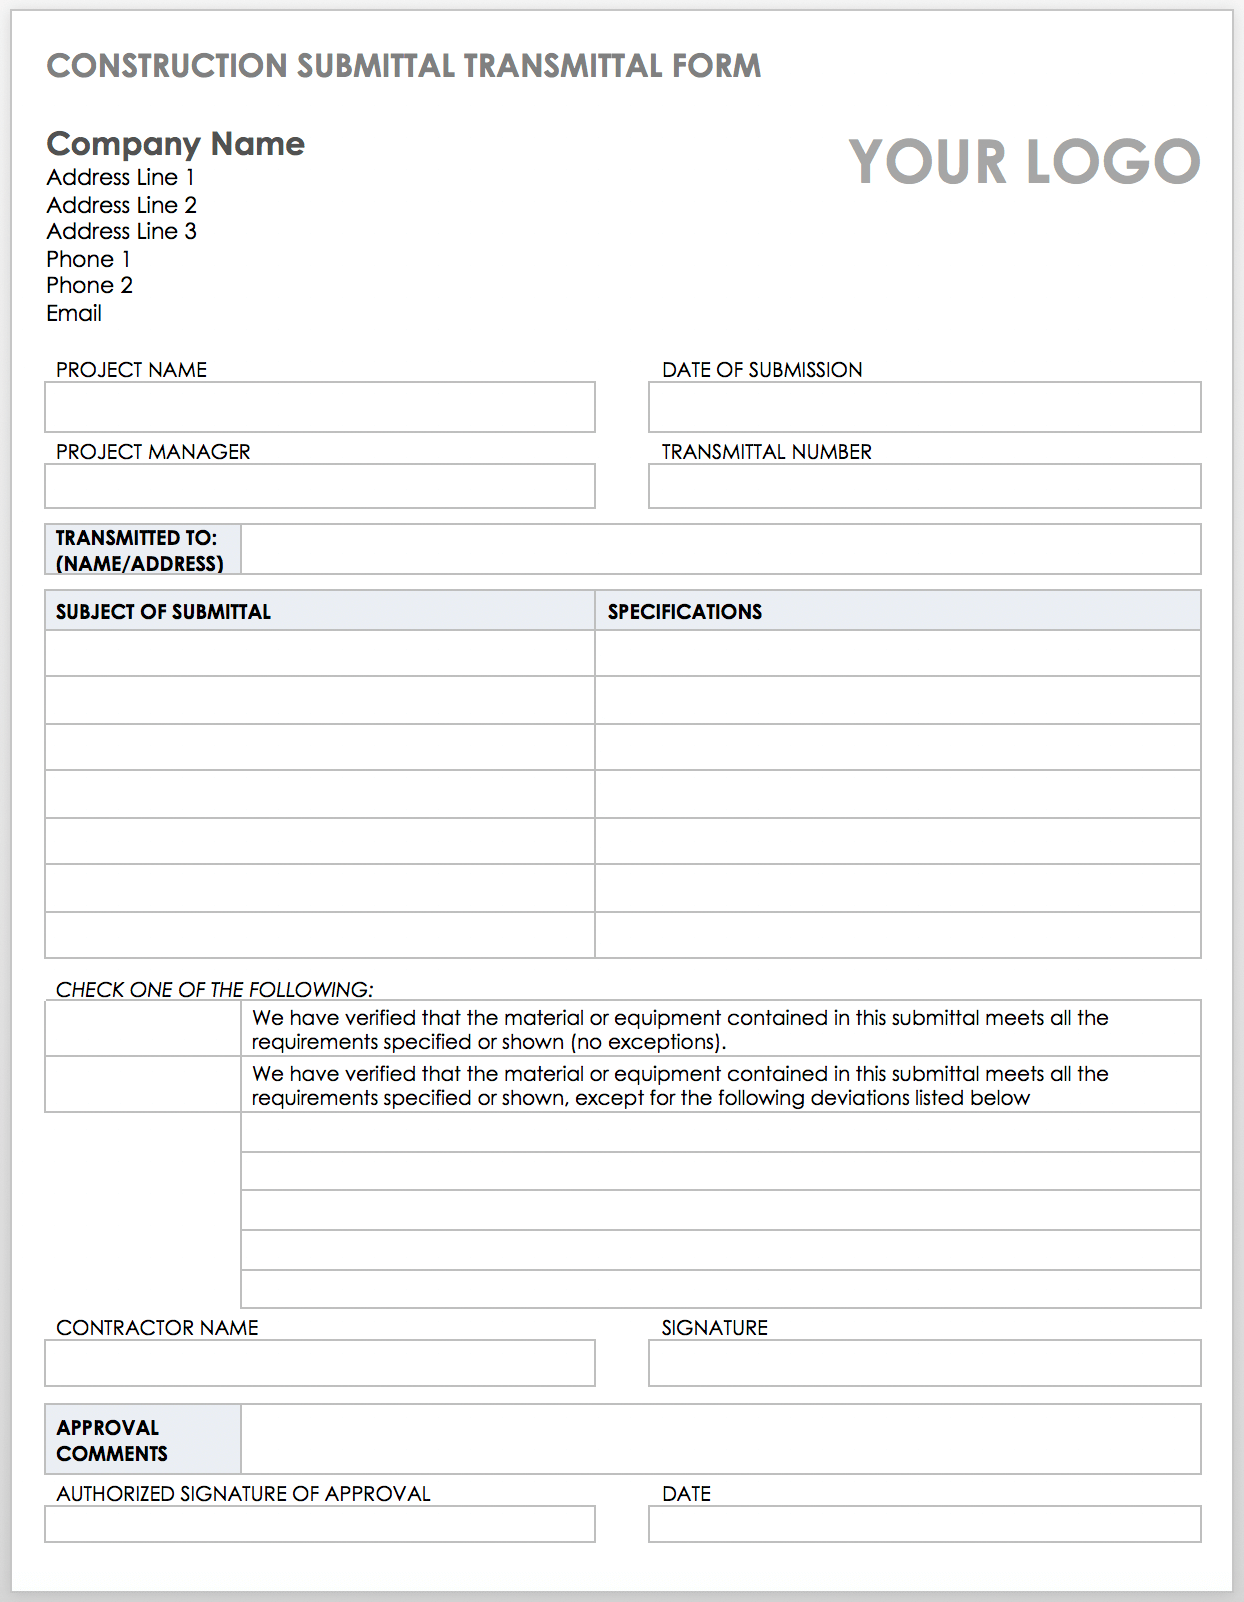 Construction Submittal Transmittal Form Template